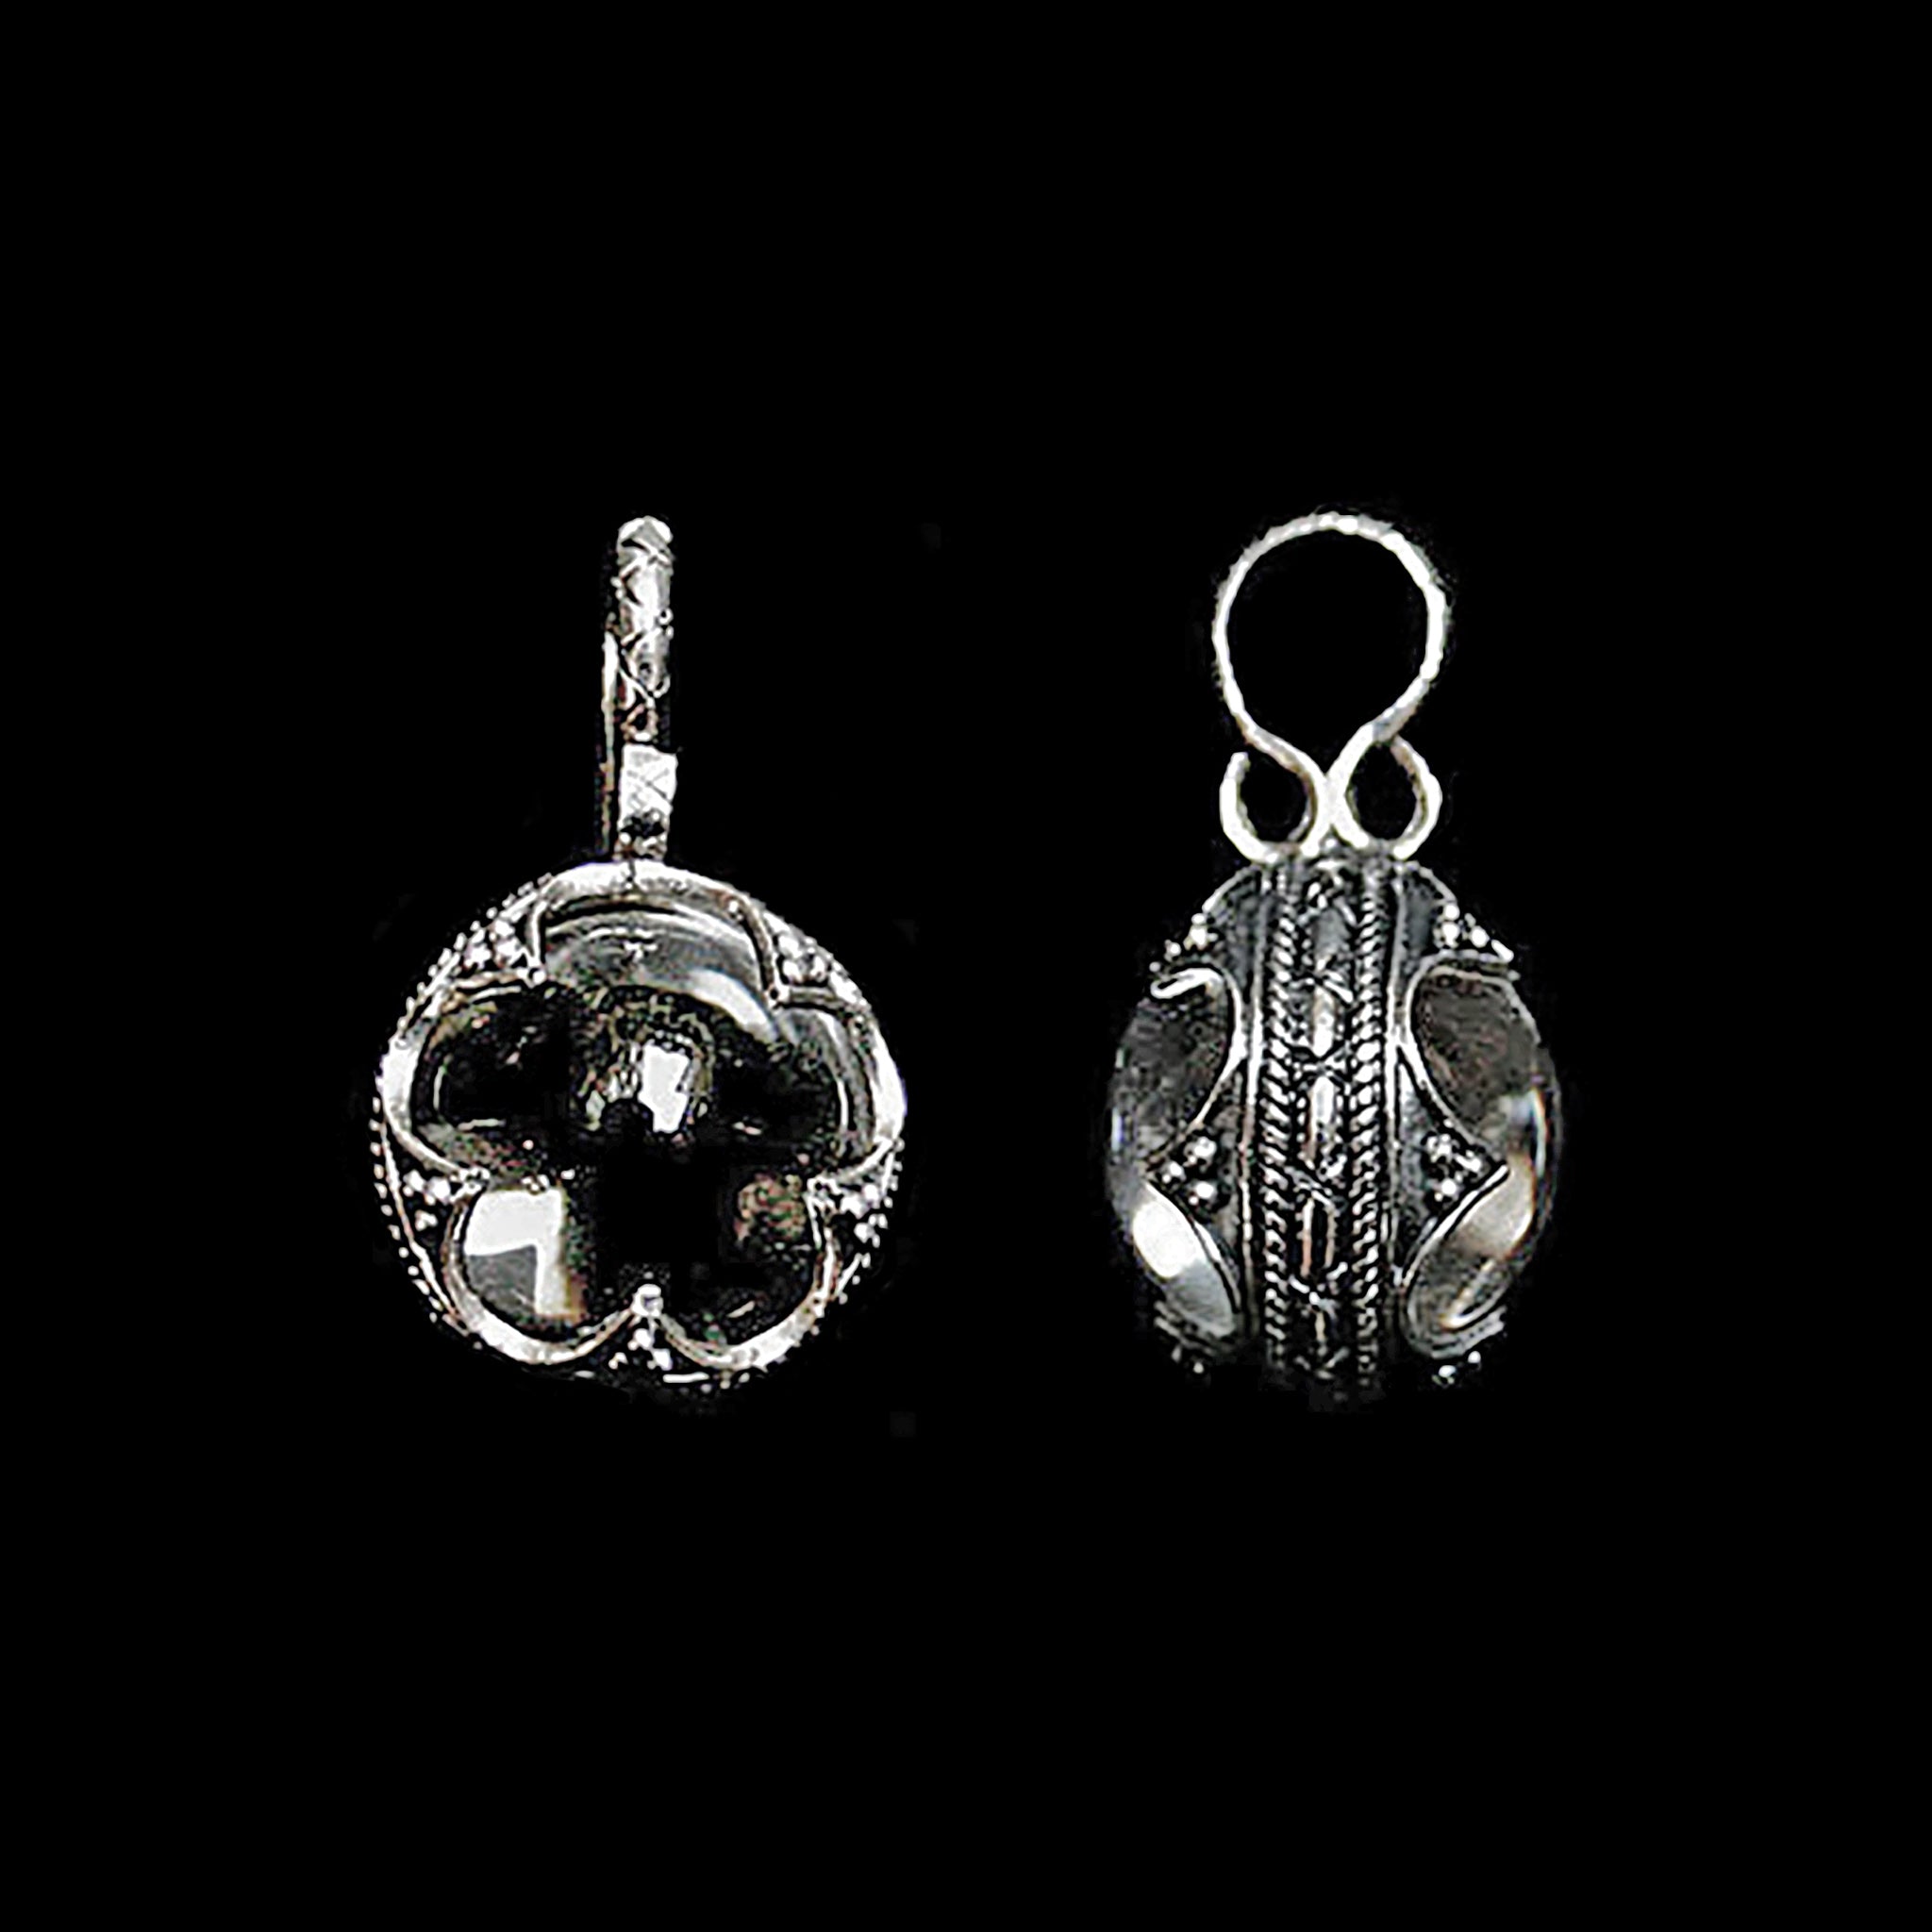 Small Silver Gotland Crystal Ball Pendants - Front & Side View